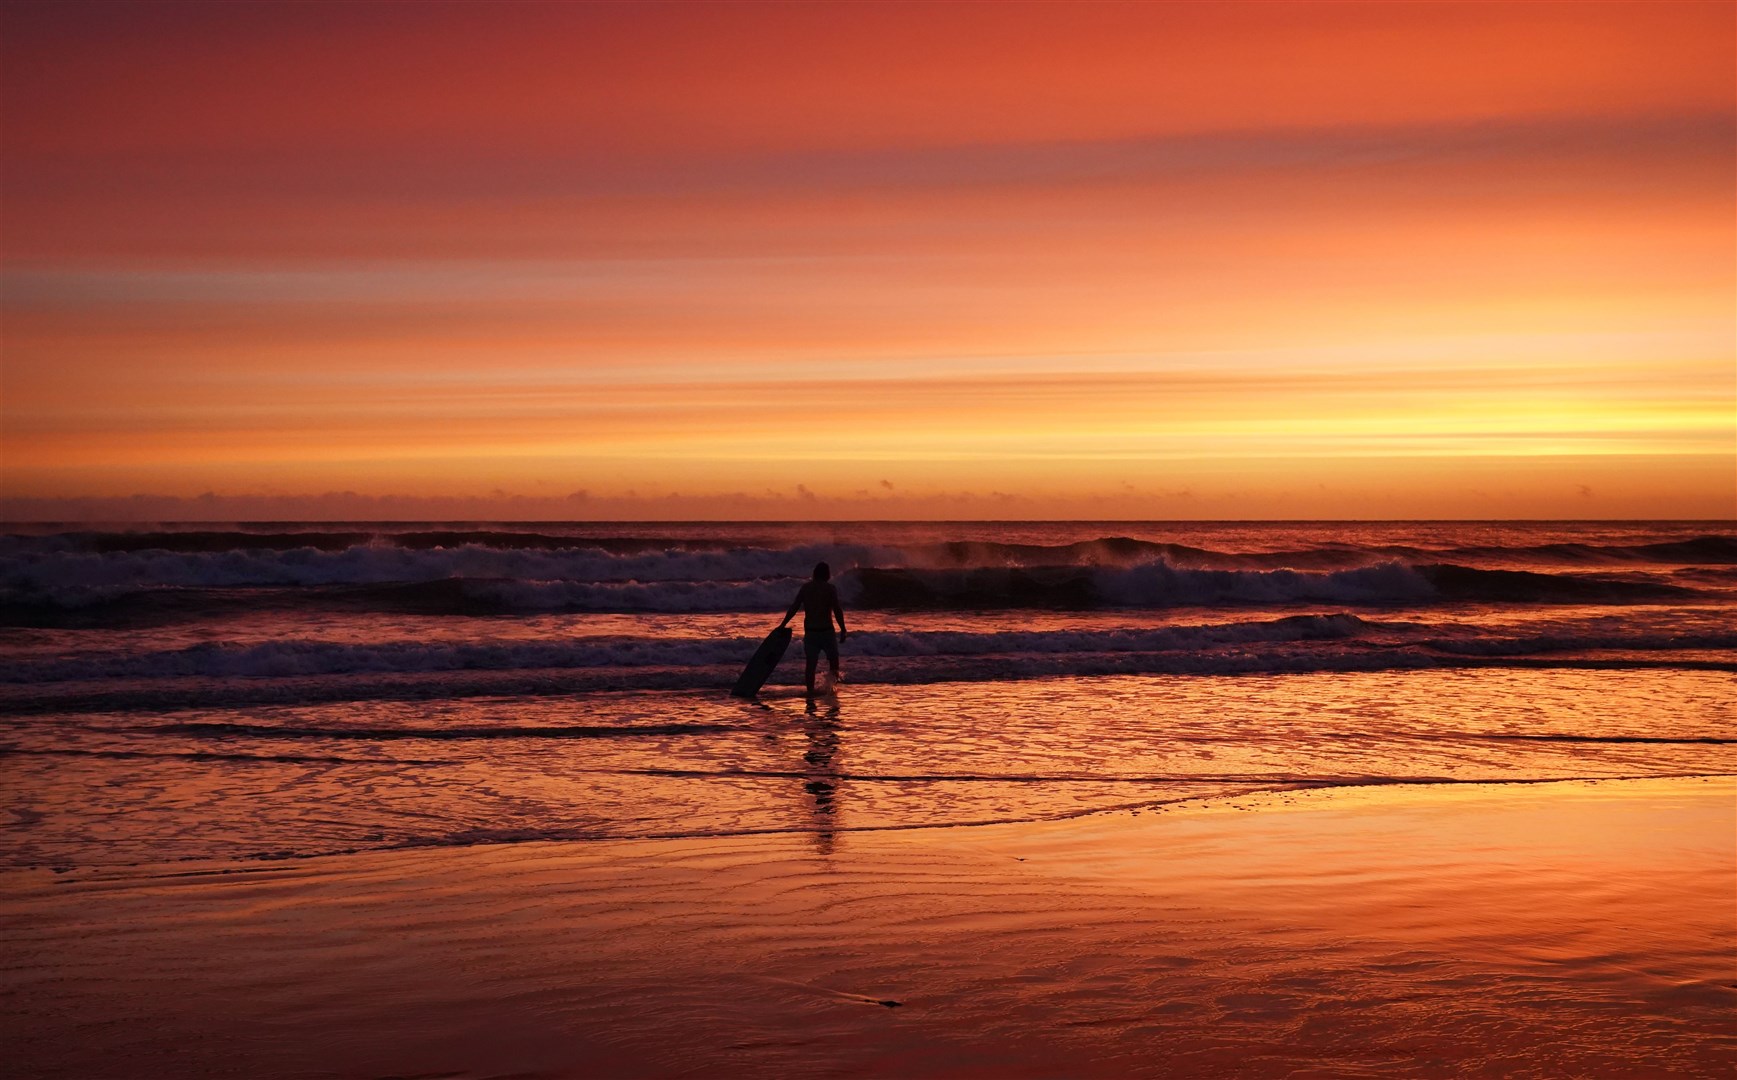 It was a freezing cold morning, but the orange sky and perfect waves were enough to tempt this surfer into the water at Tynemouth Longsands beach (Owen Humphreys/PA)